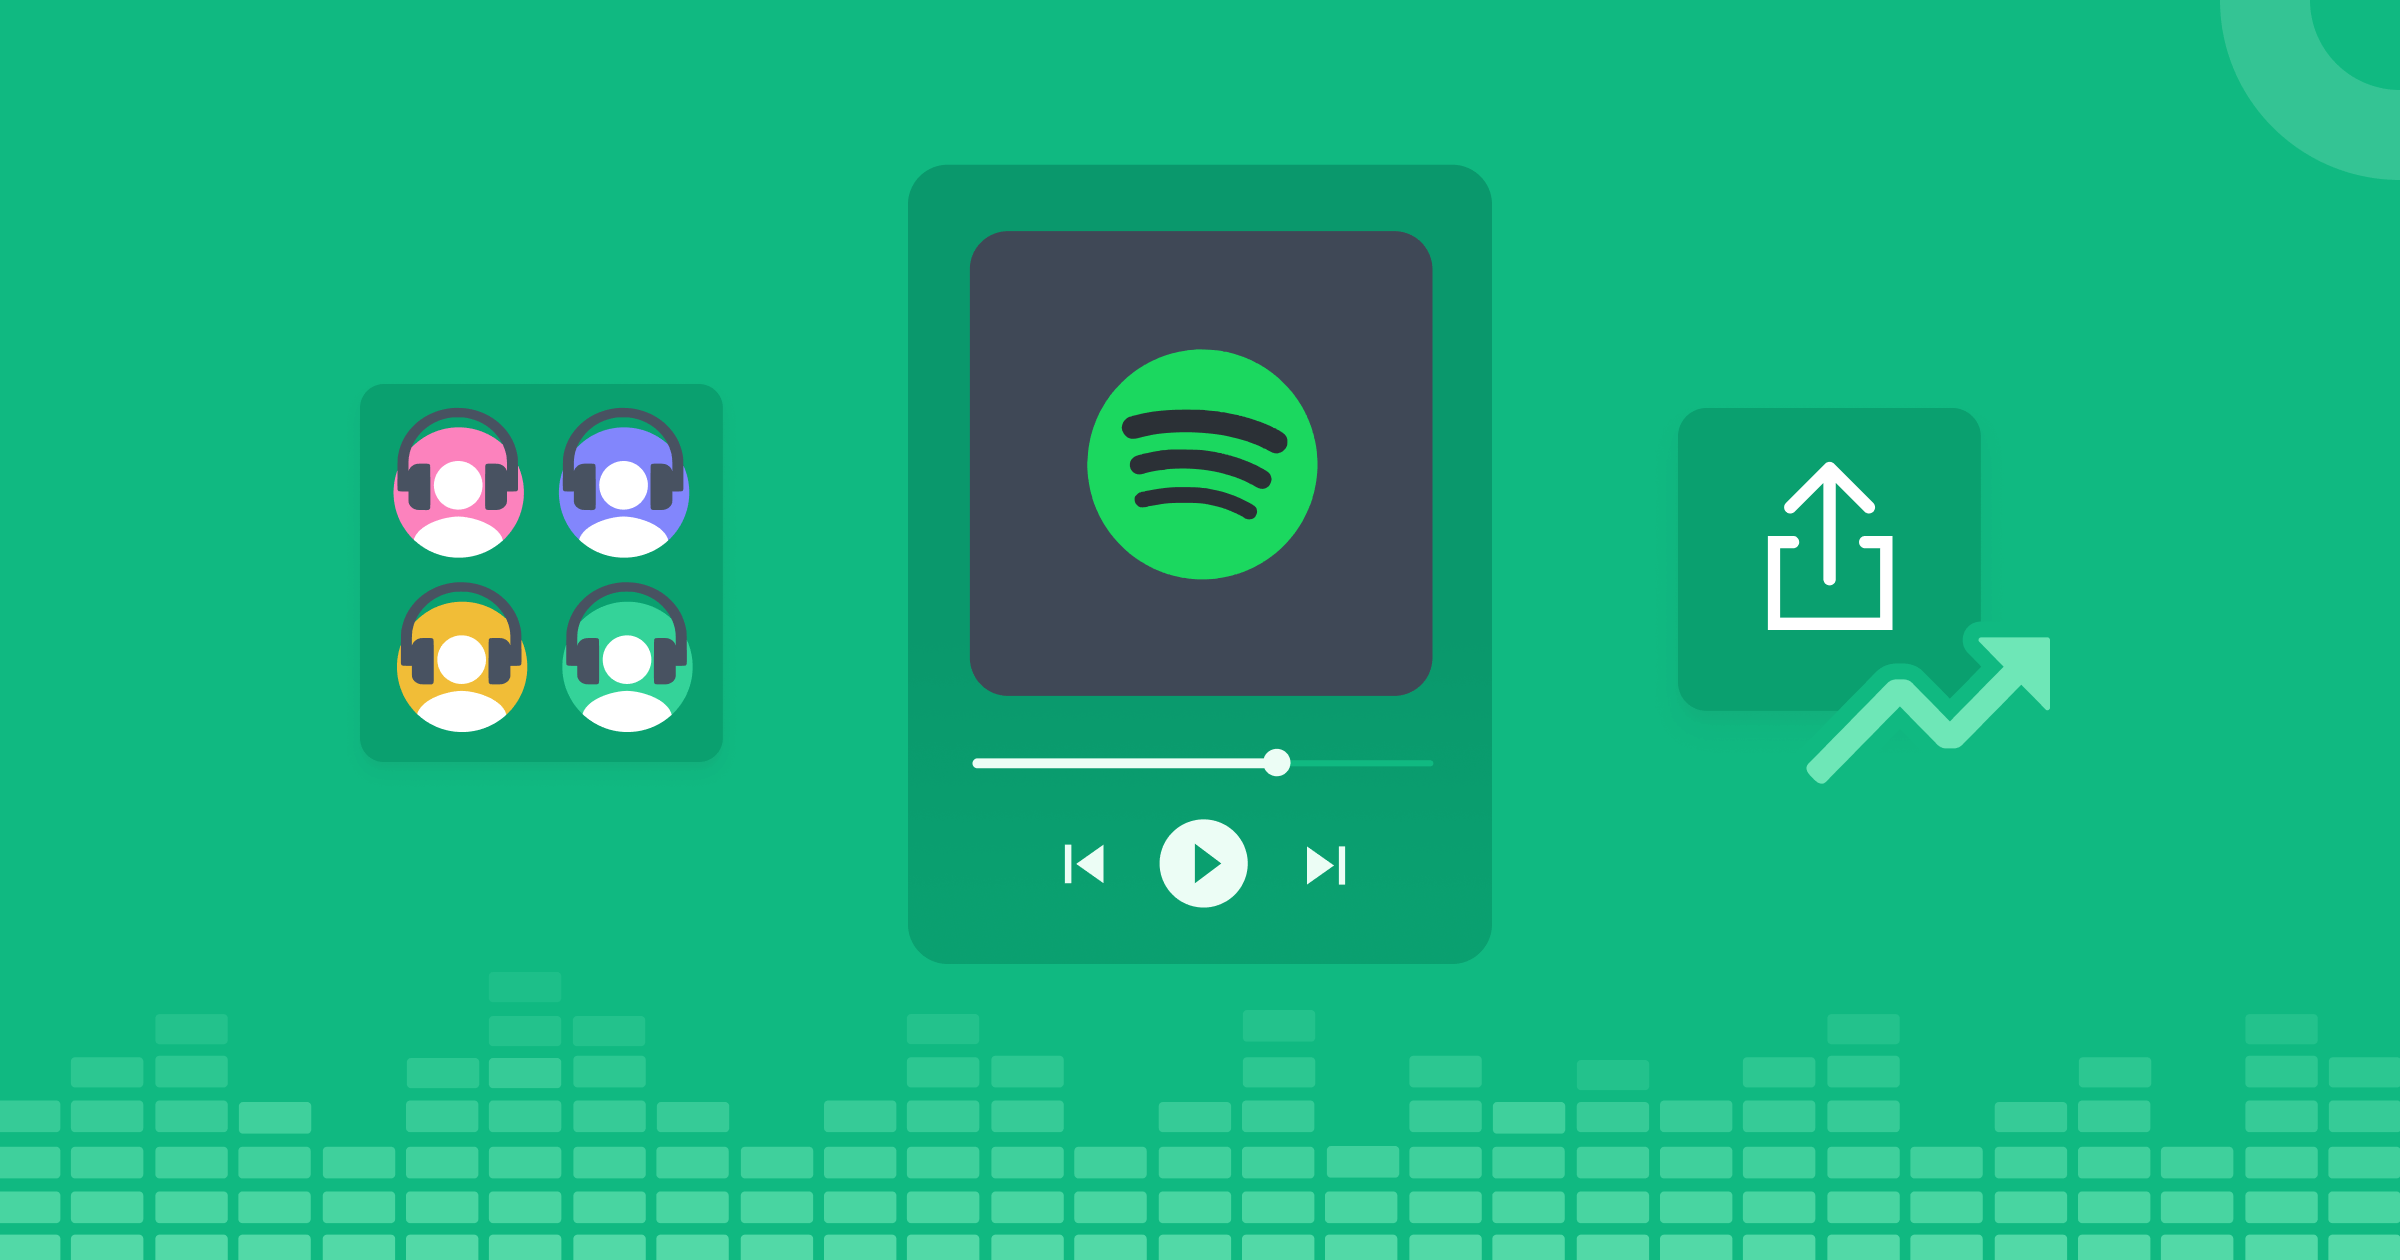 Spotify player between icons of 4 listeners together and a graph next to the share button representing the CRO increase.